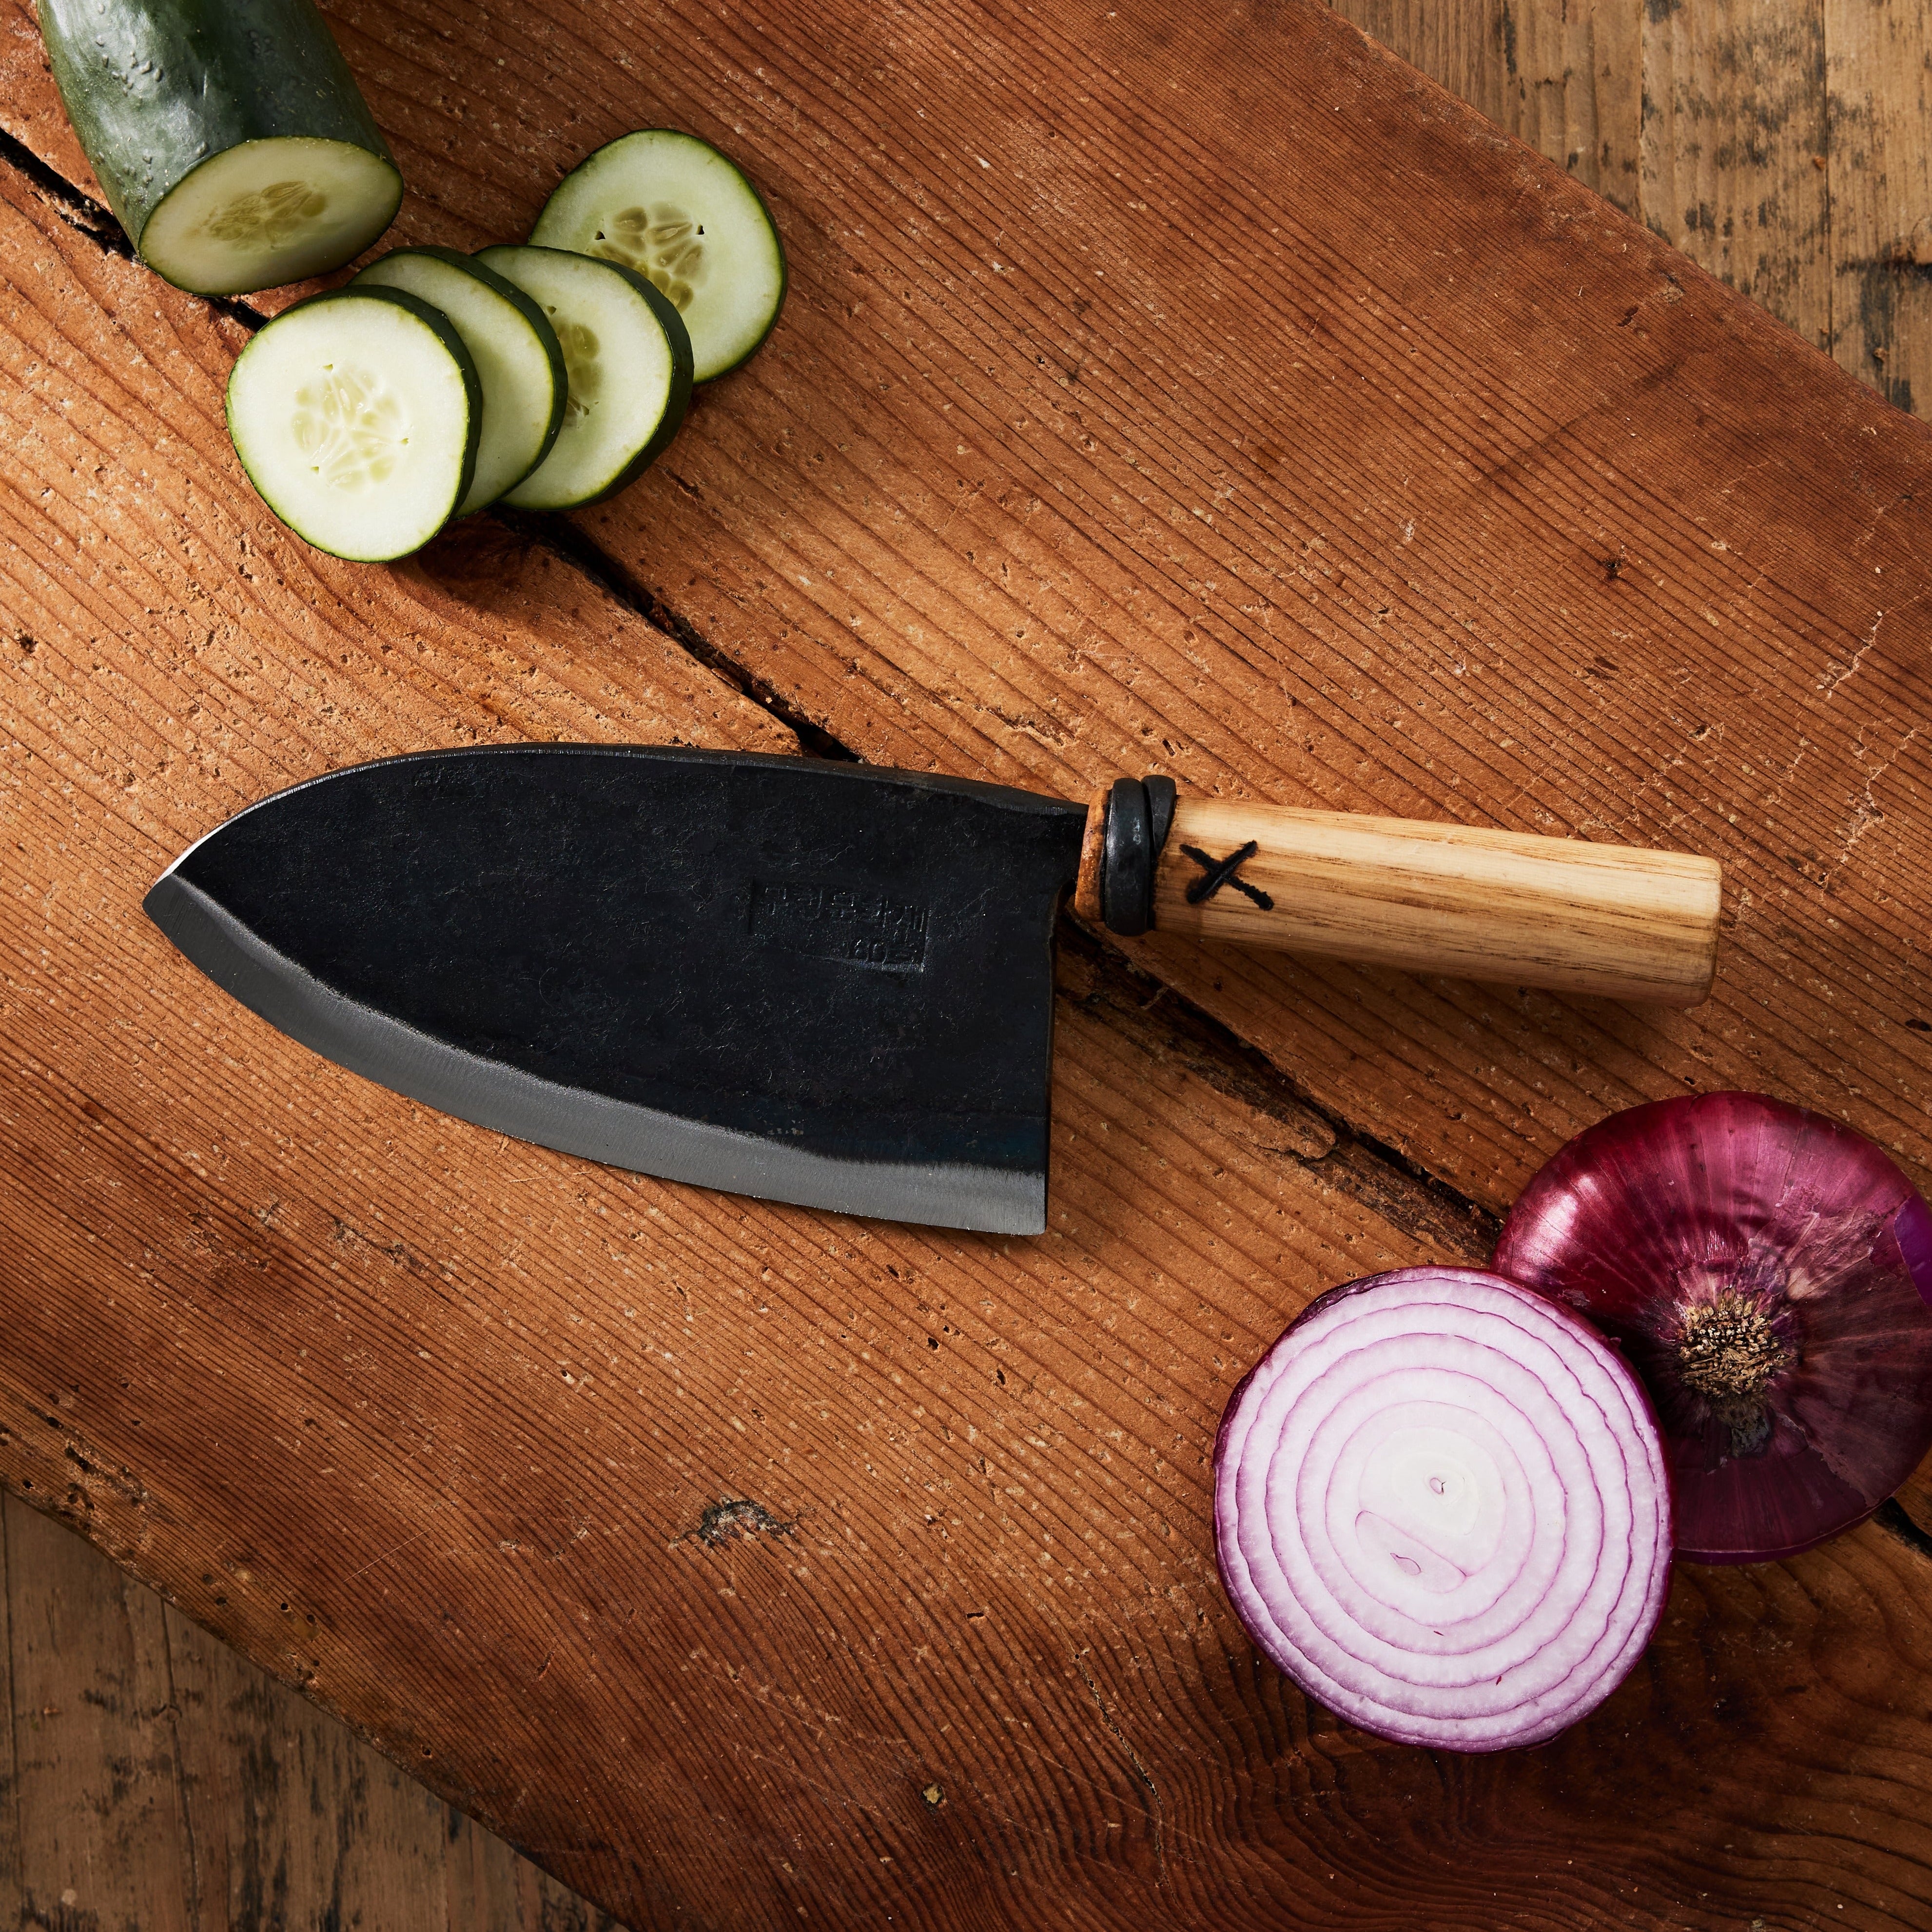 Master Shin's Anvil Large Chef's Knife – House&Hold